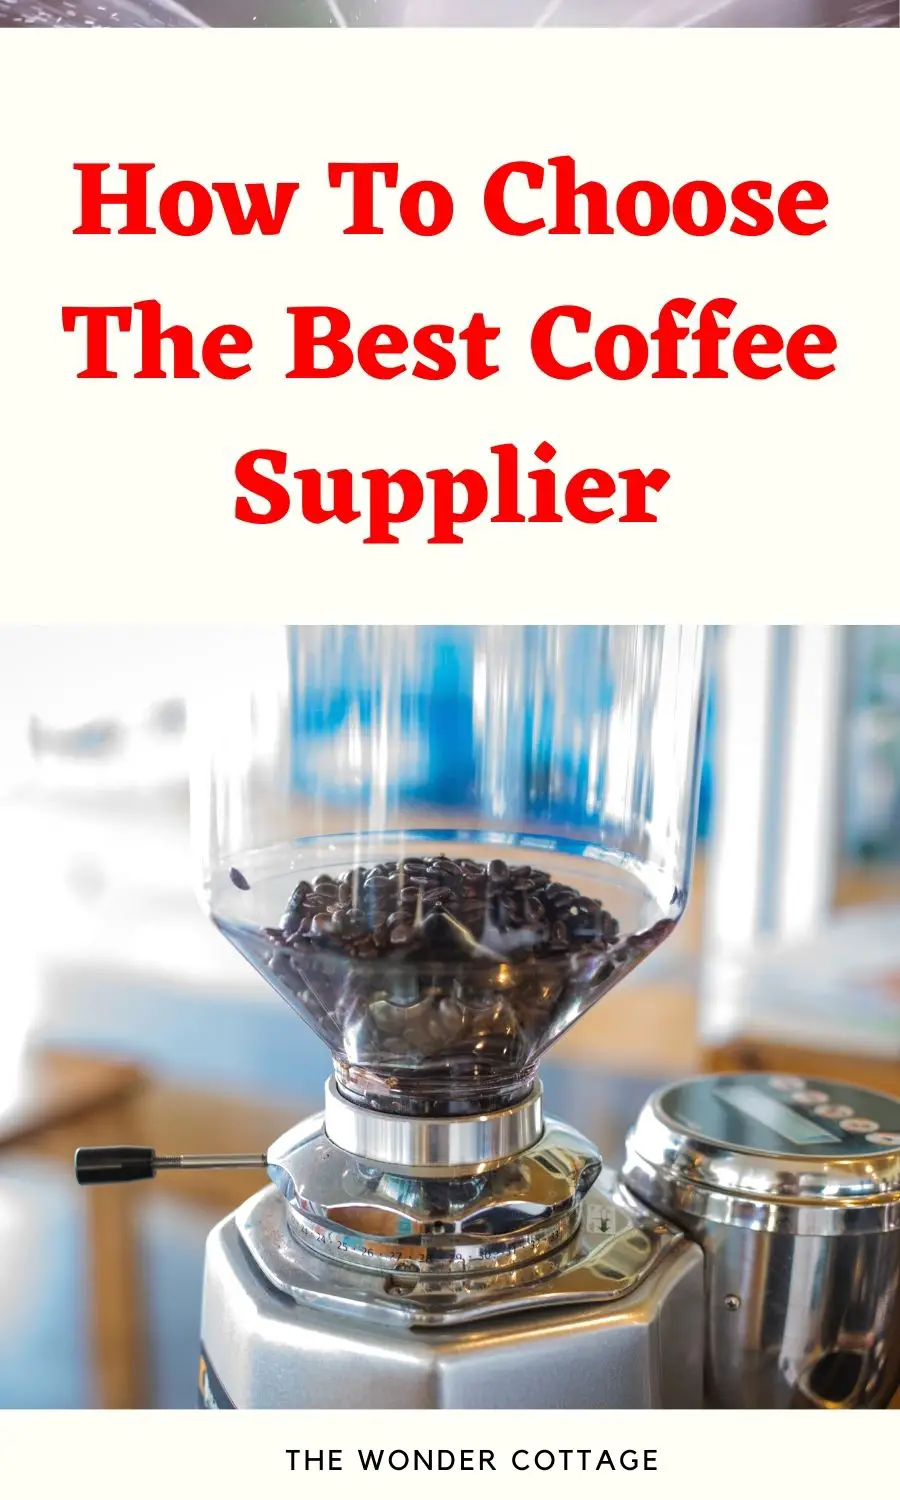 How to choose the best coffee supplier